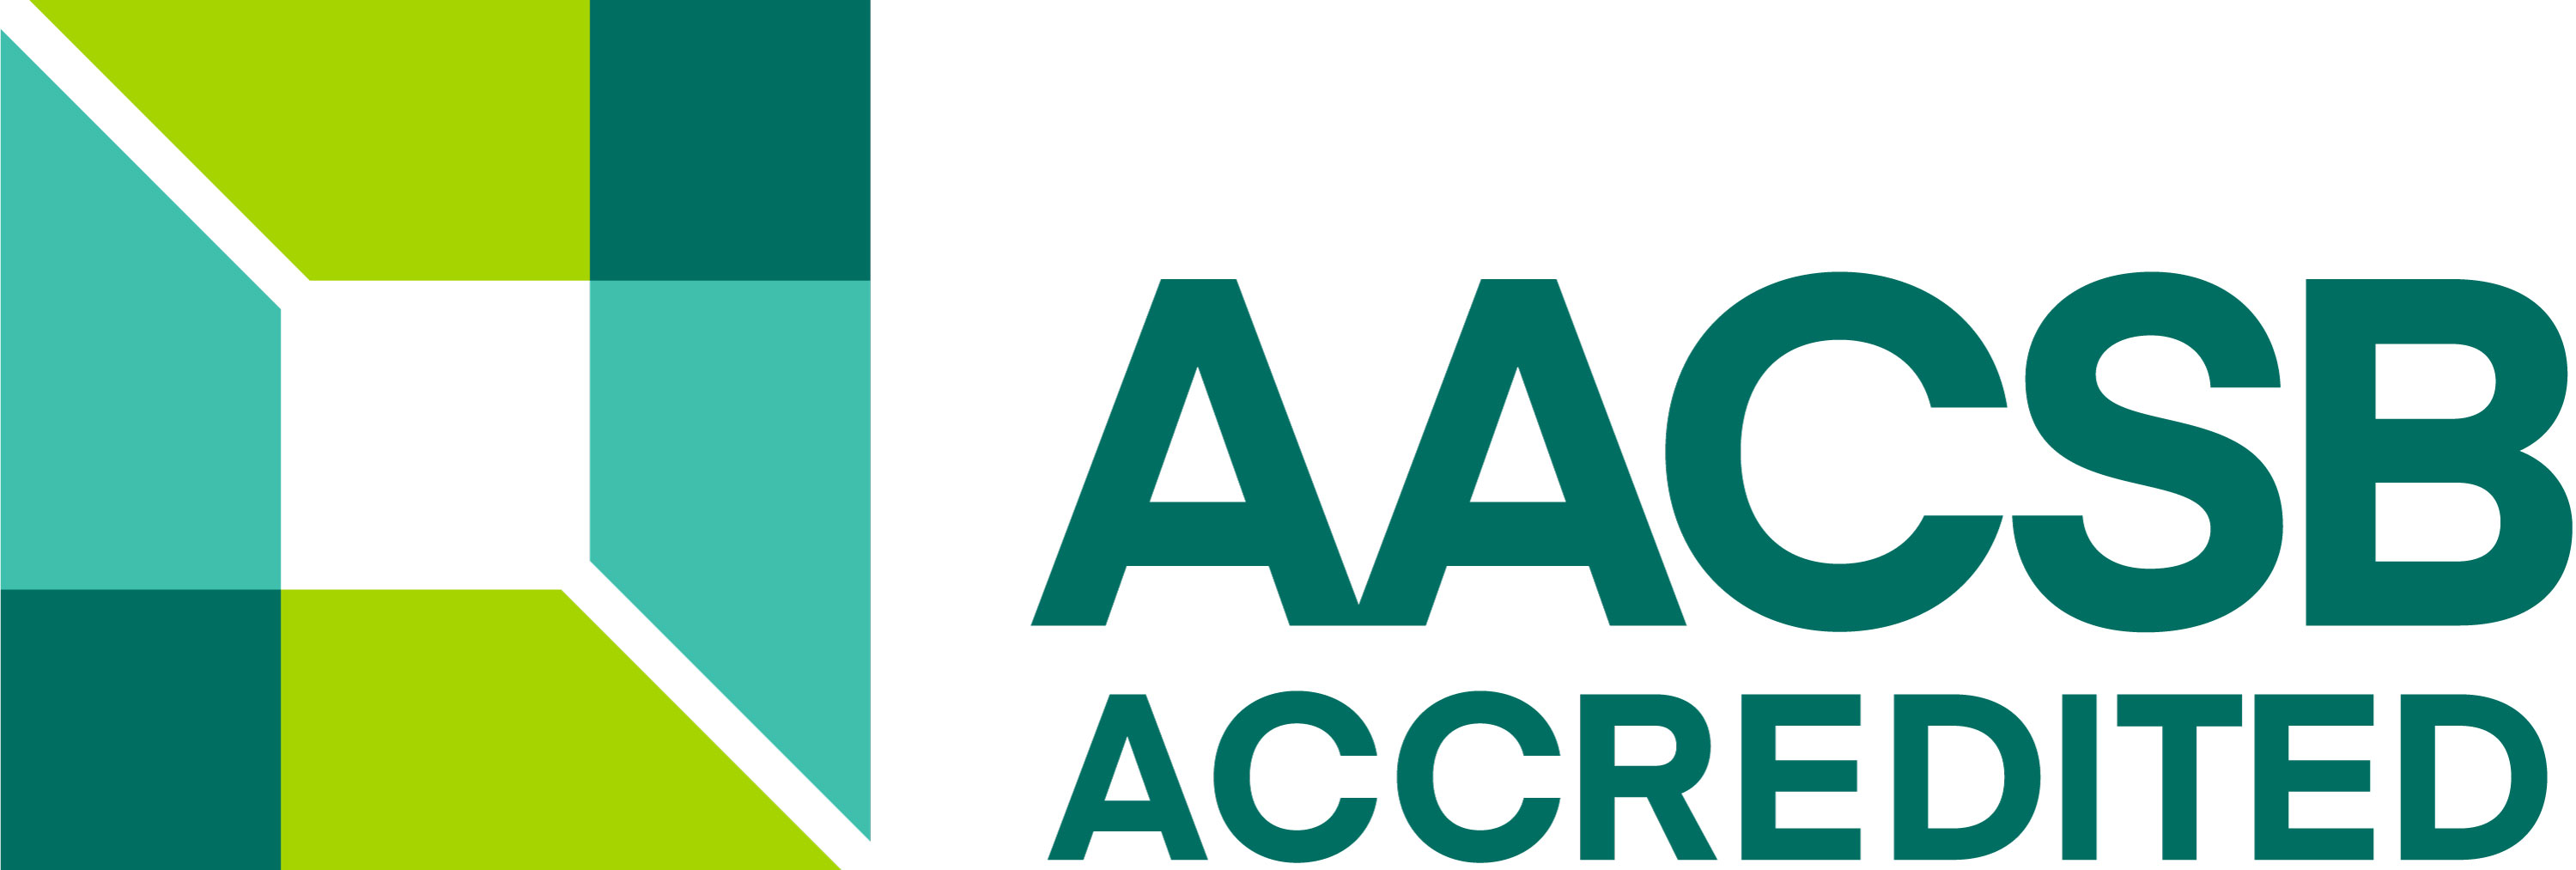 AACSB accredited logo.